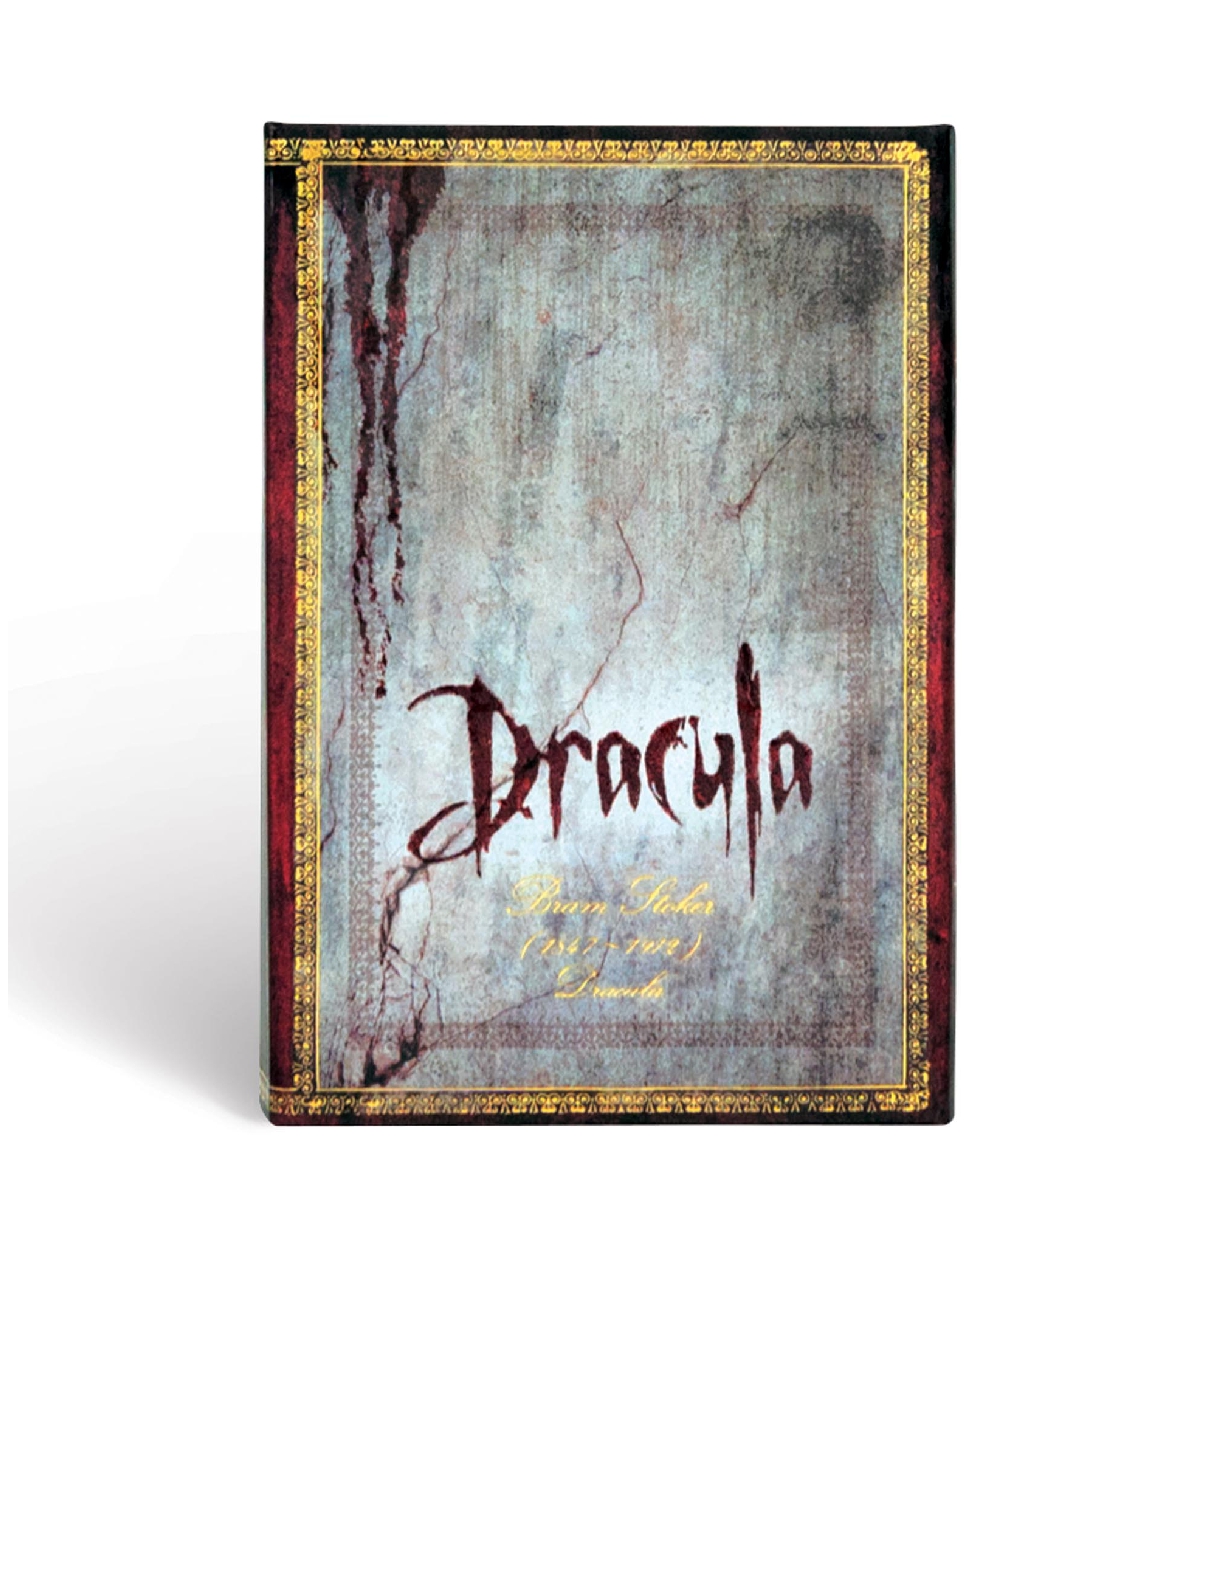 Bram Stoker, Dracula, Embellished Manuscripts Collection, Hardcover, Mini, Unlined, Wrap Closure, 176 Pg, 85 GSM